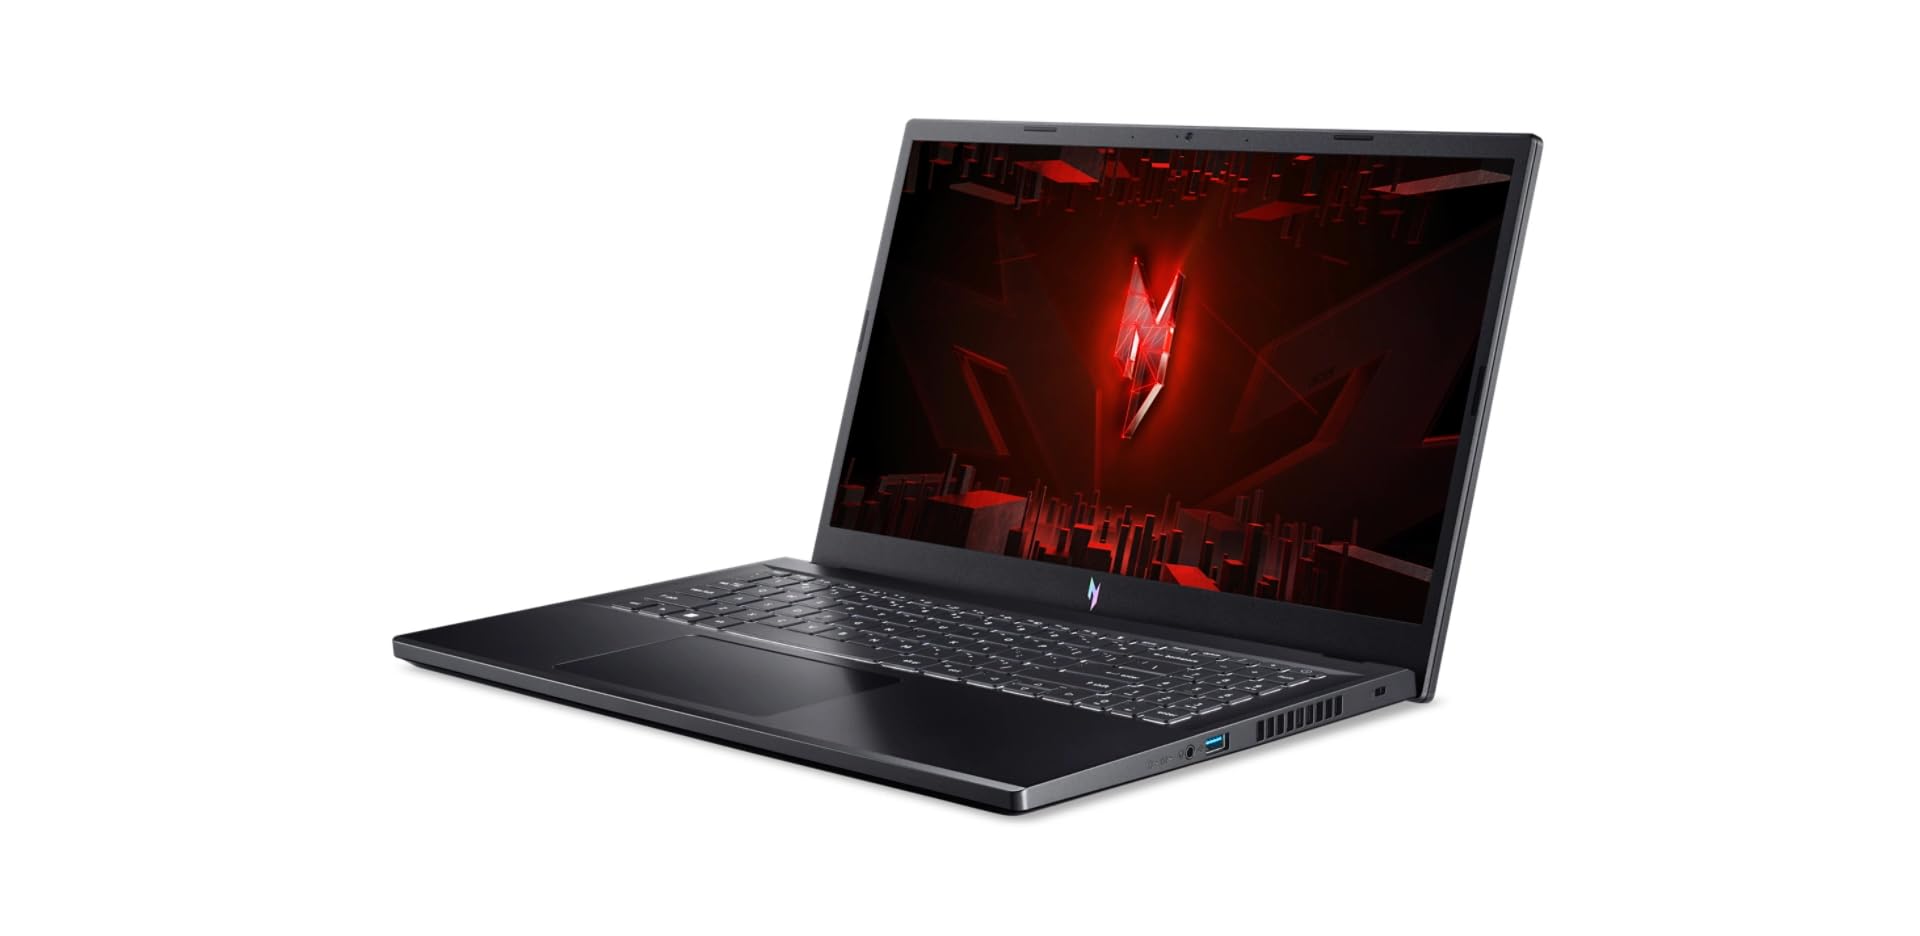 acer Nitro 5 Gaming Laptop 15.6" FHD IPS 144Hz Intel Octa-Core i5-13420H Processor (Beats i7-12650H) 16GB RAM 512GB SSD GeForce RTX 3050 6GB Graphic Backlit Thunderbolt Win11 + HDMI Cable